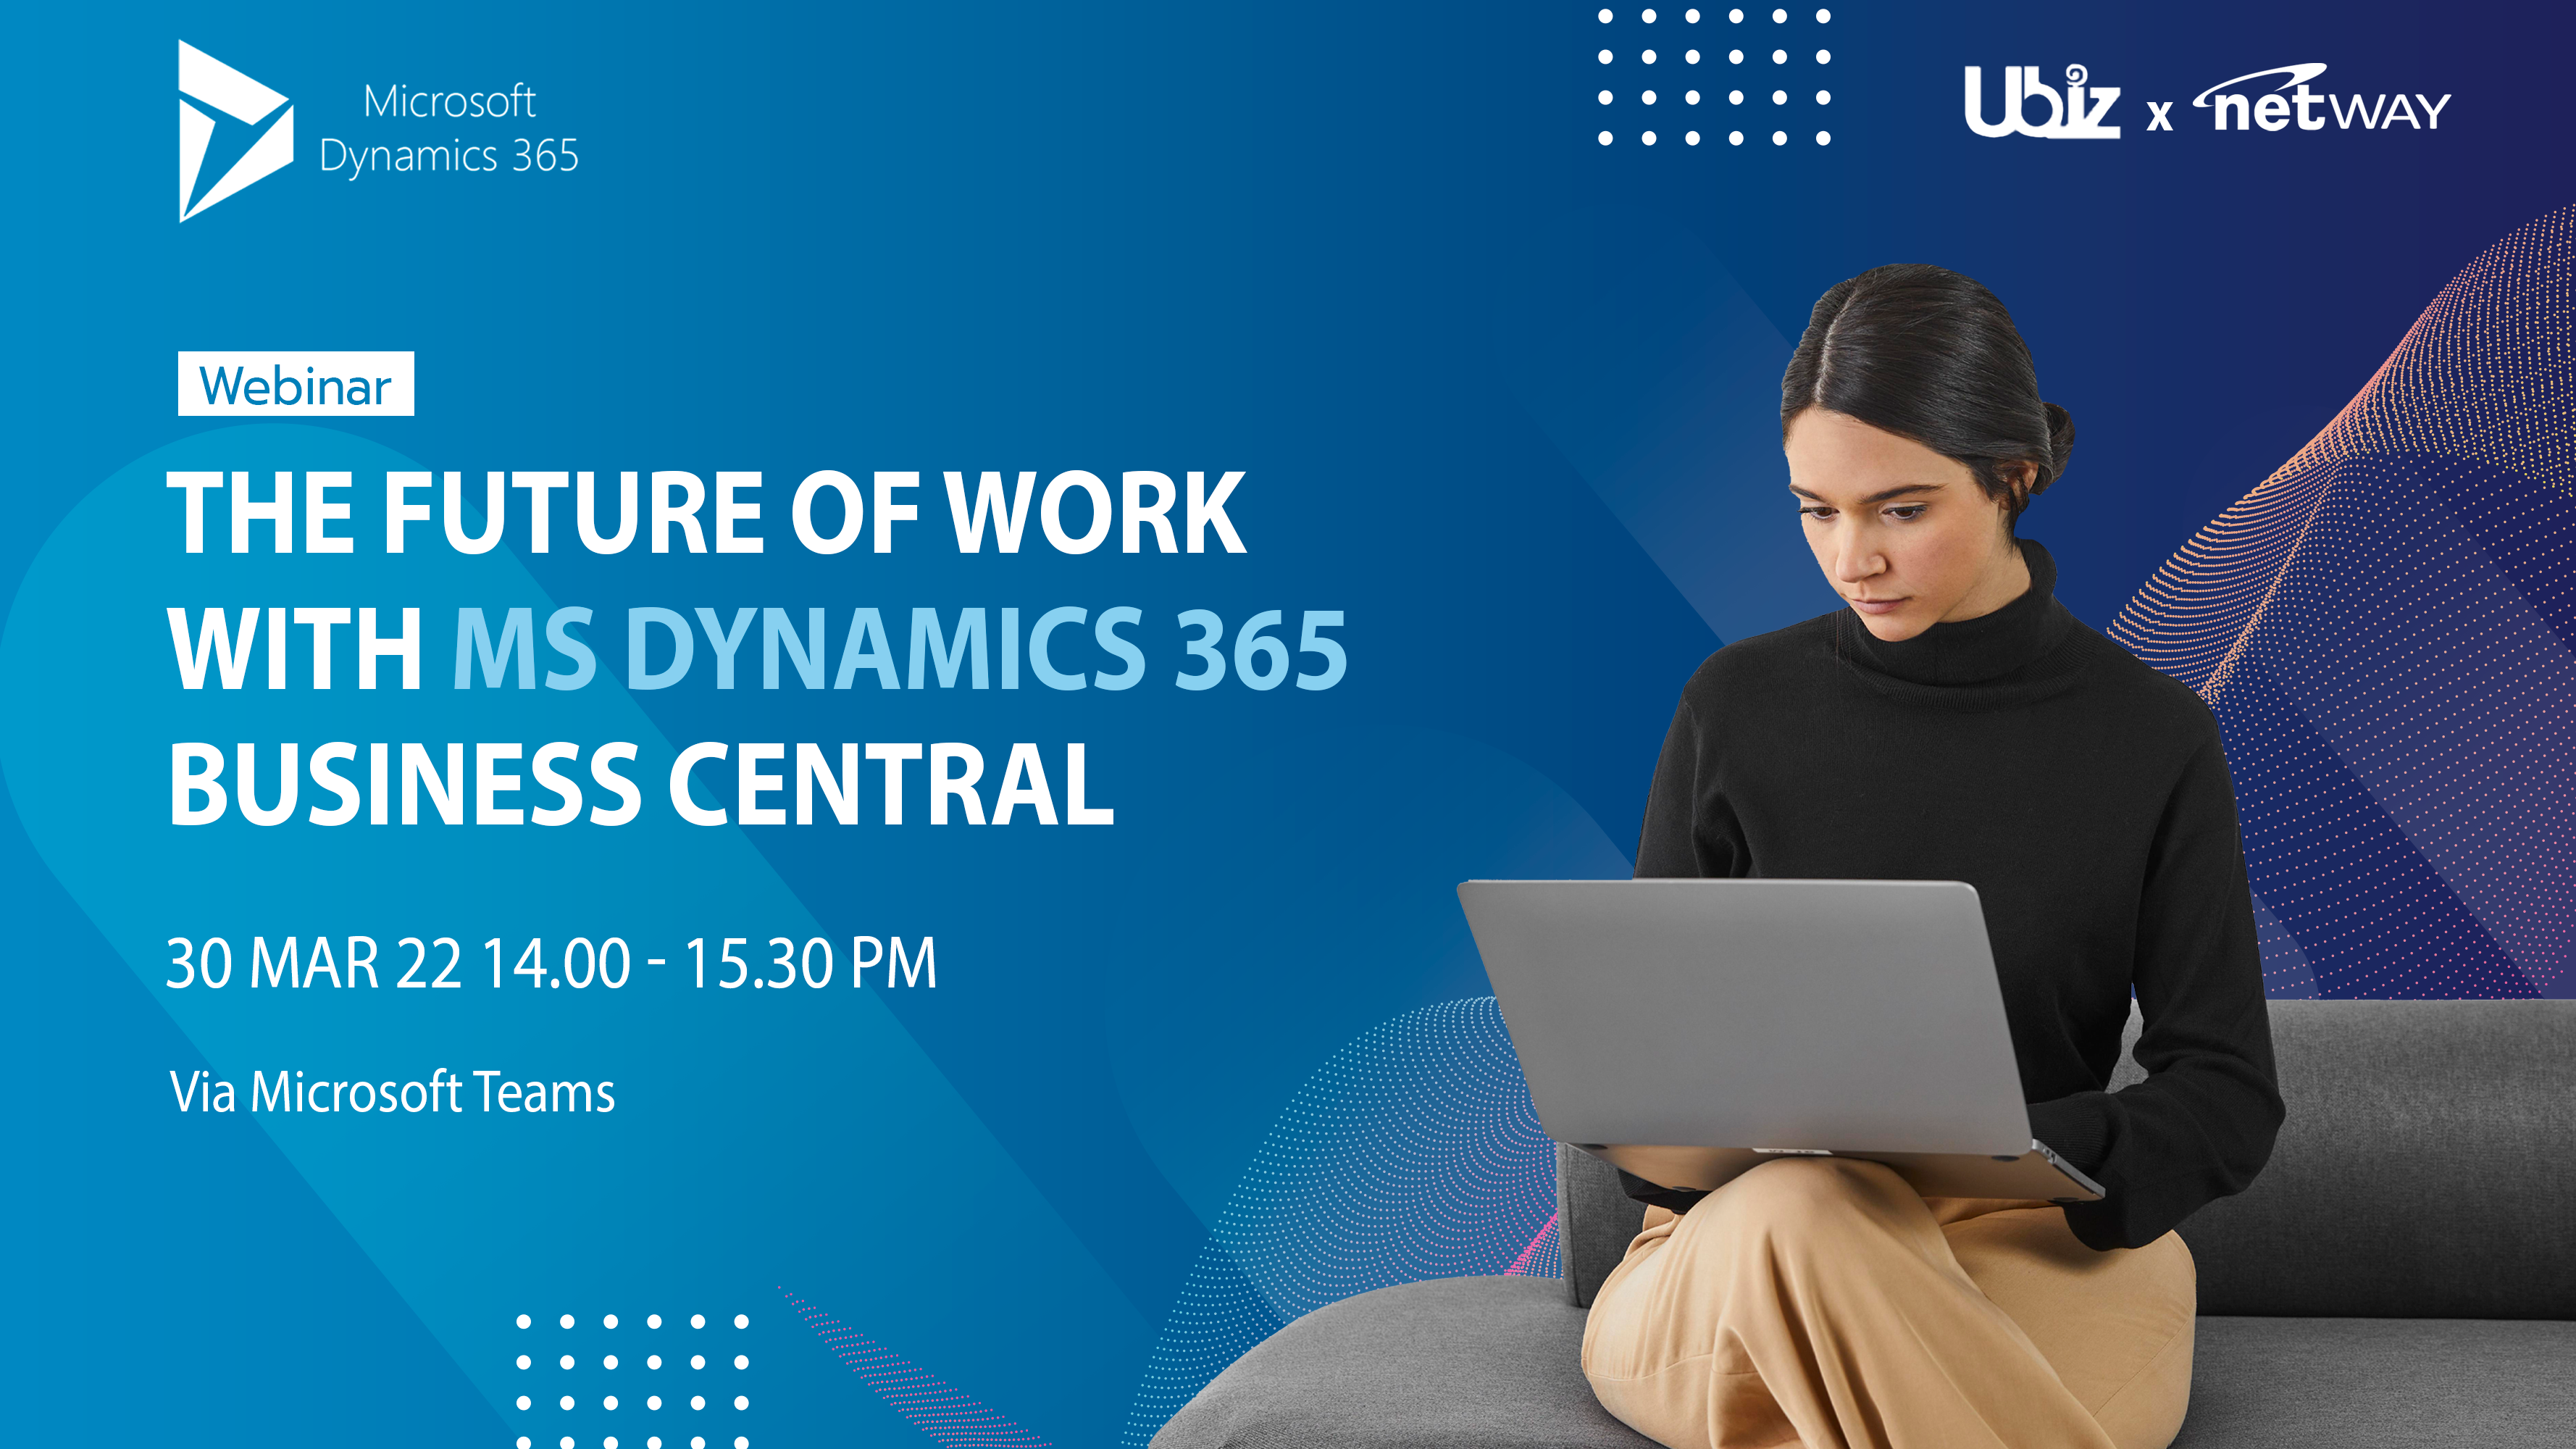 Webinar: The Future of Work  with MS Dynamics 365 Business Central (30Mar’22)